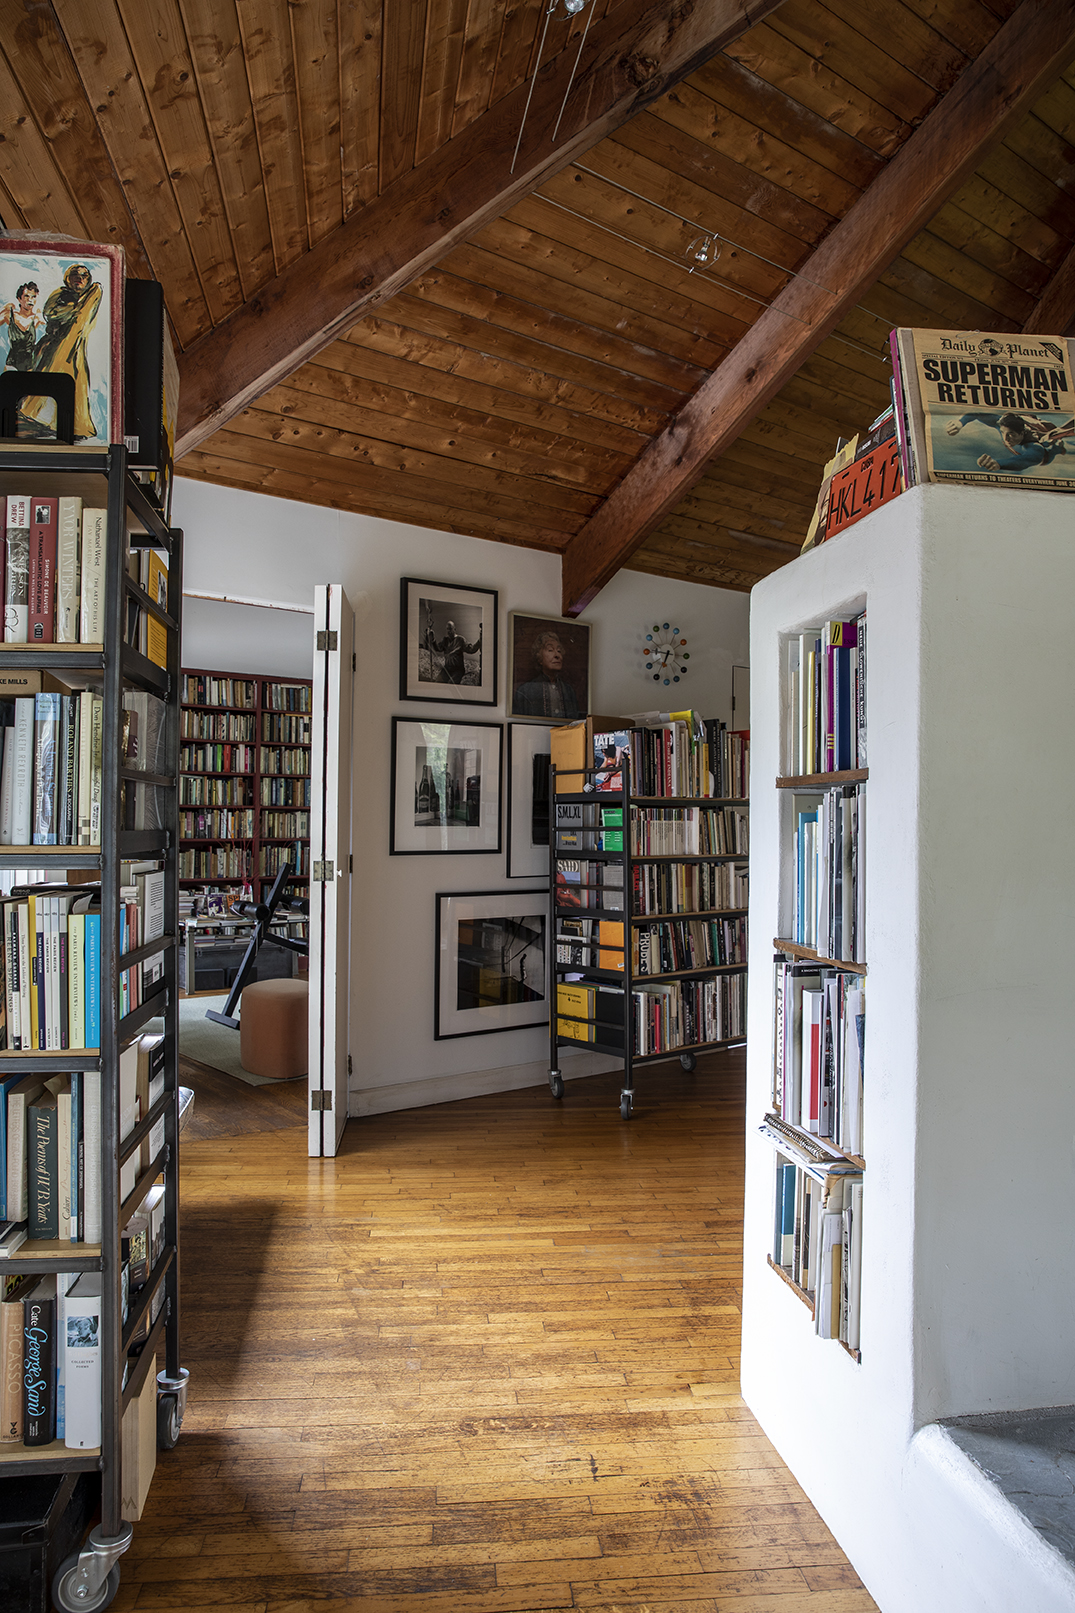 interior of Conover's home, with built-in book shelves and framed art.